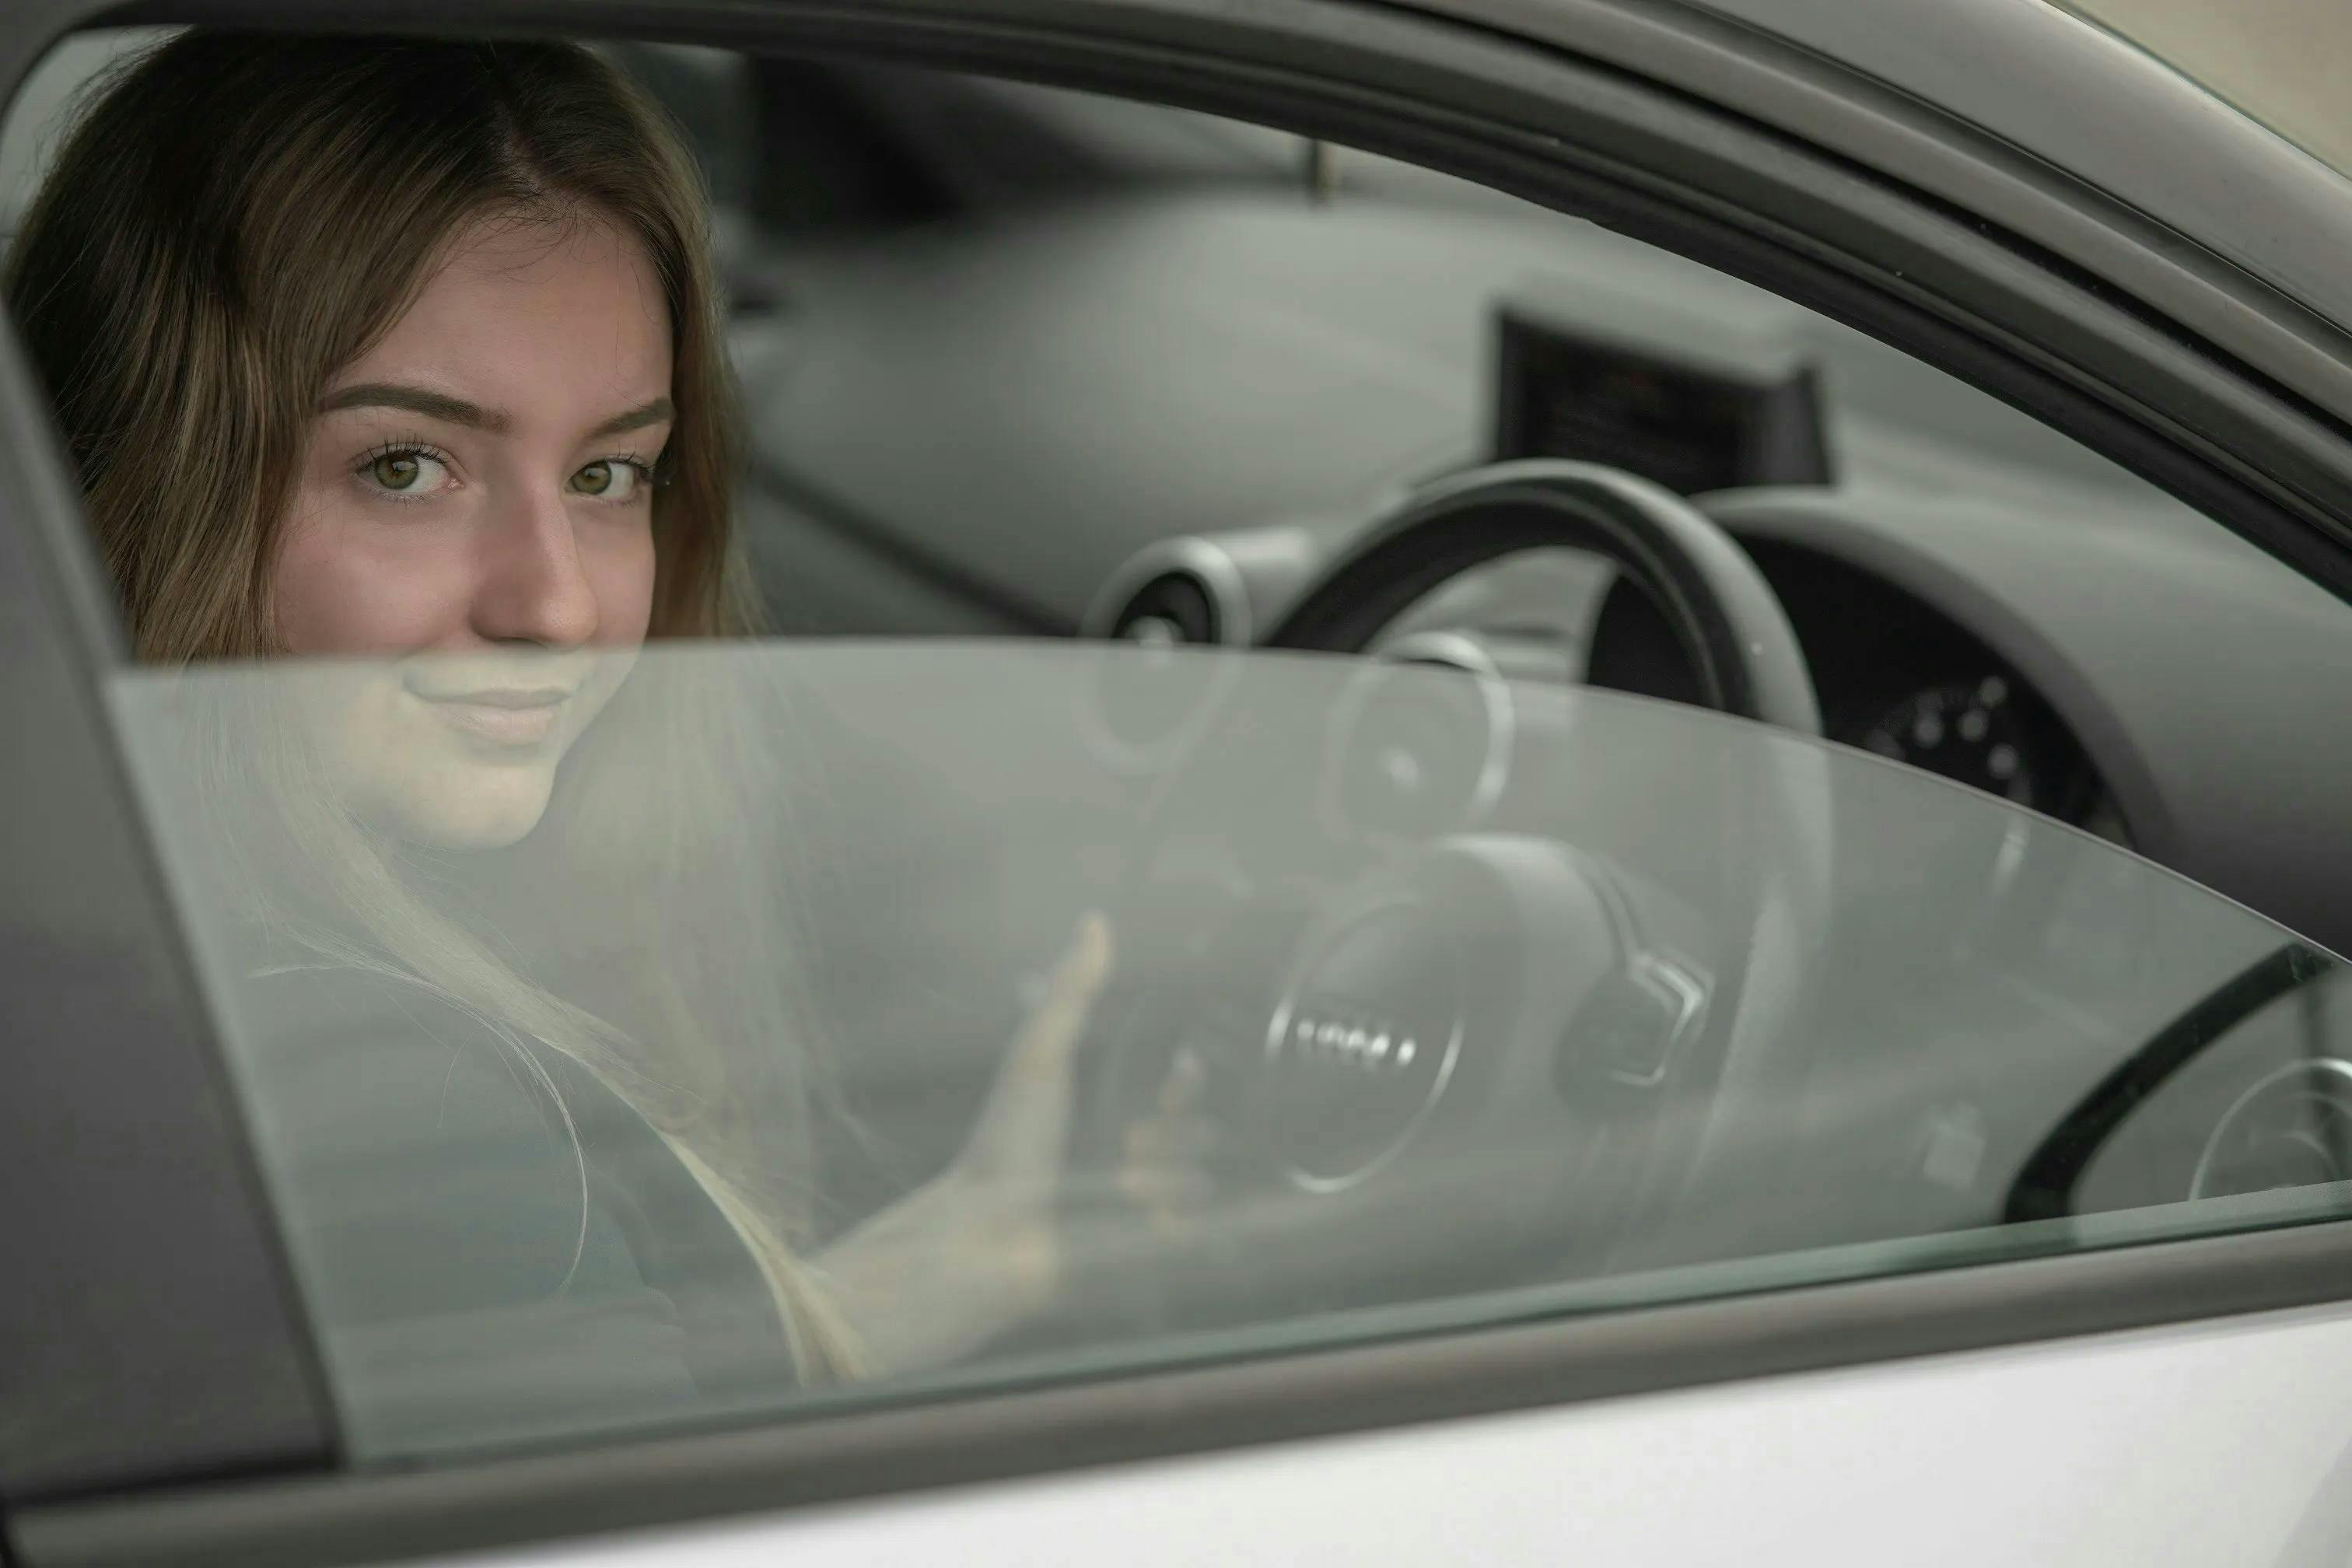 A young woman glancing out of the window of a car as she sits in the driver's seat